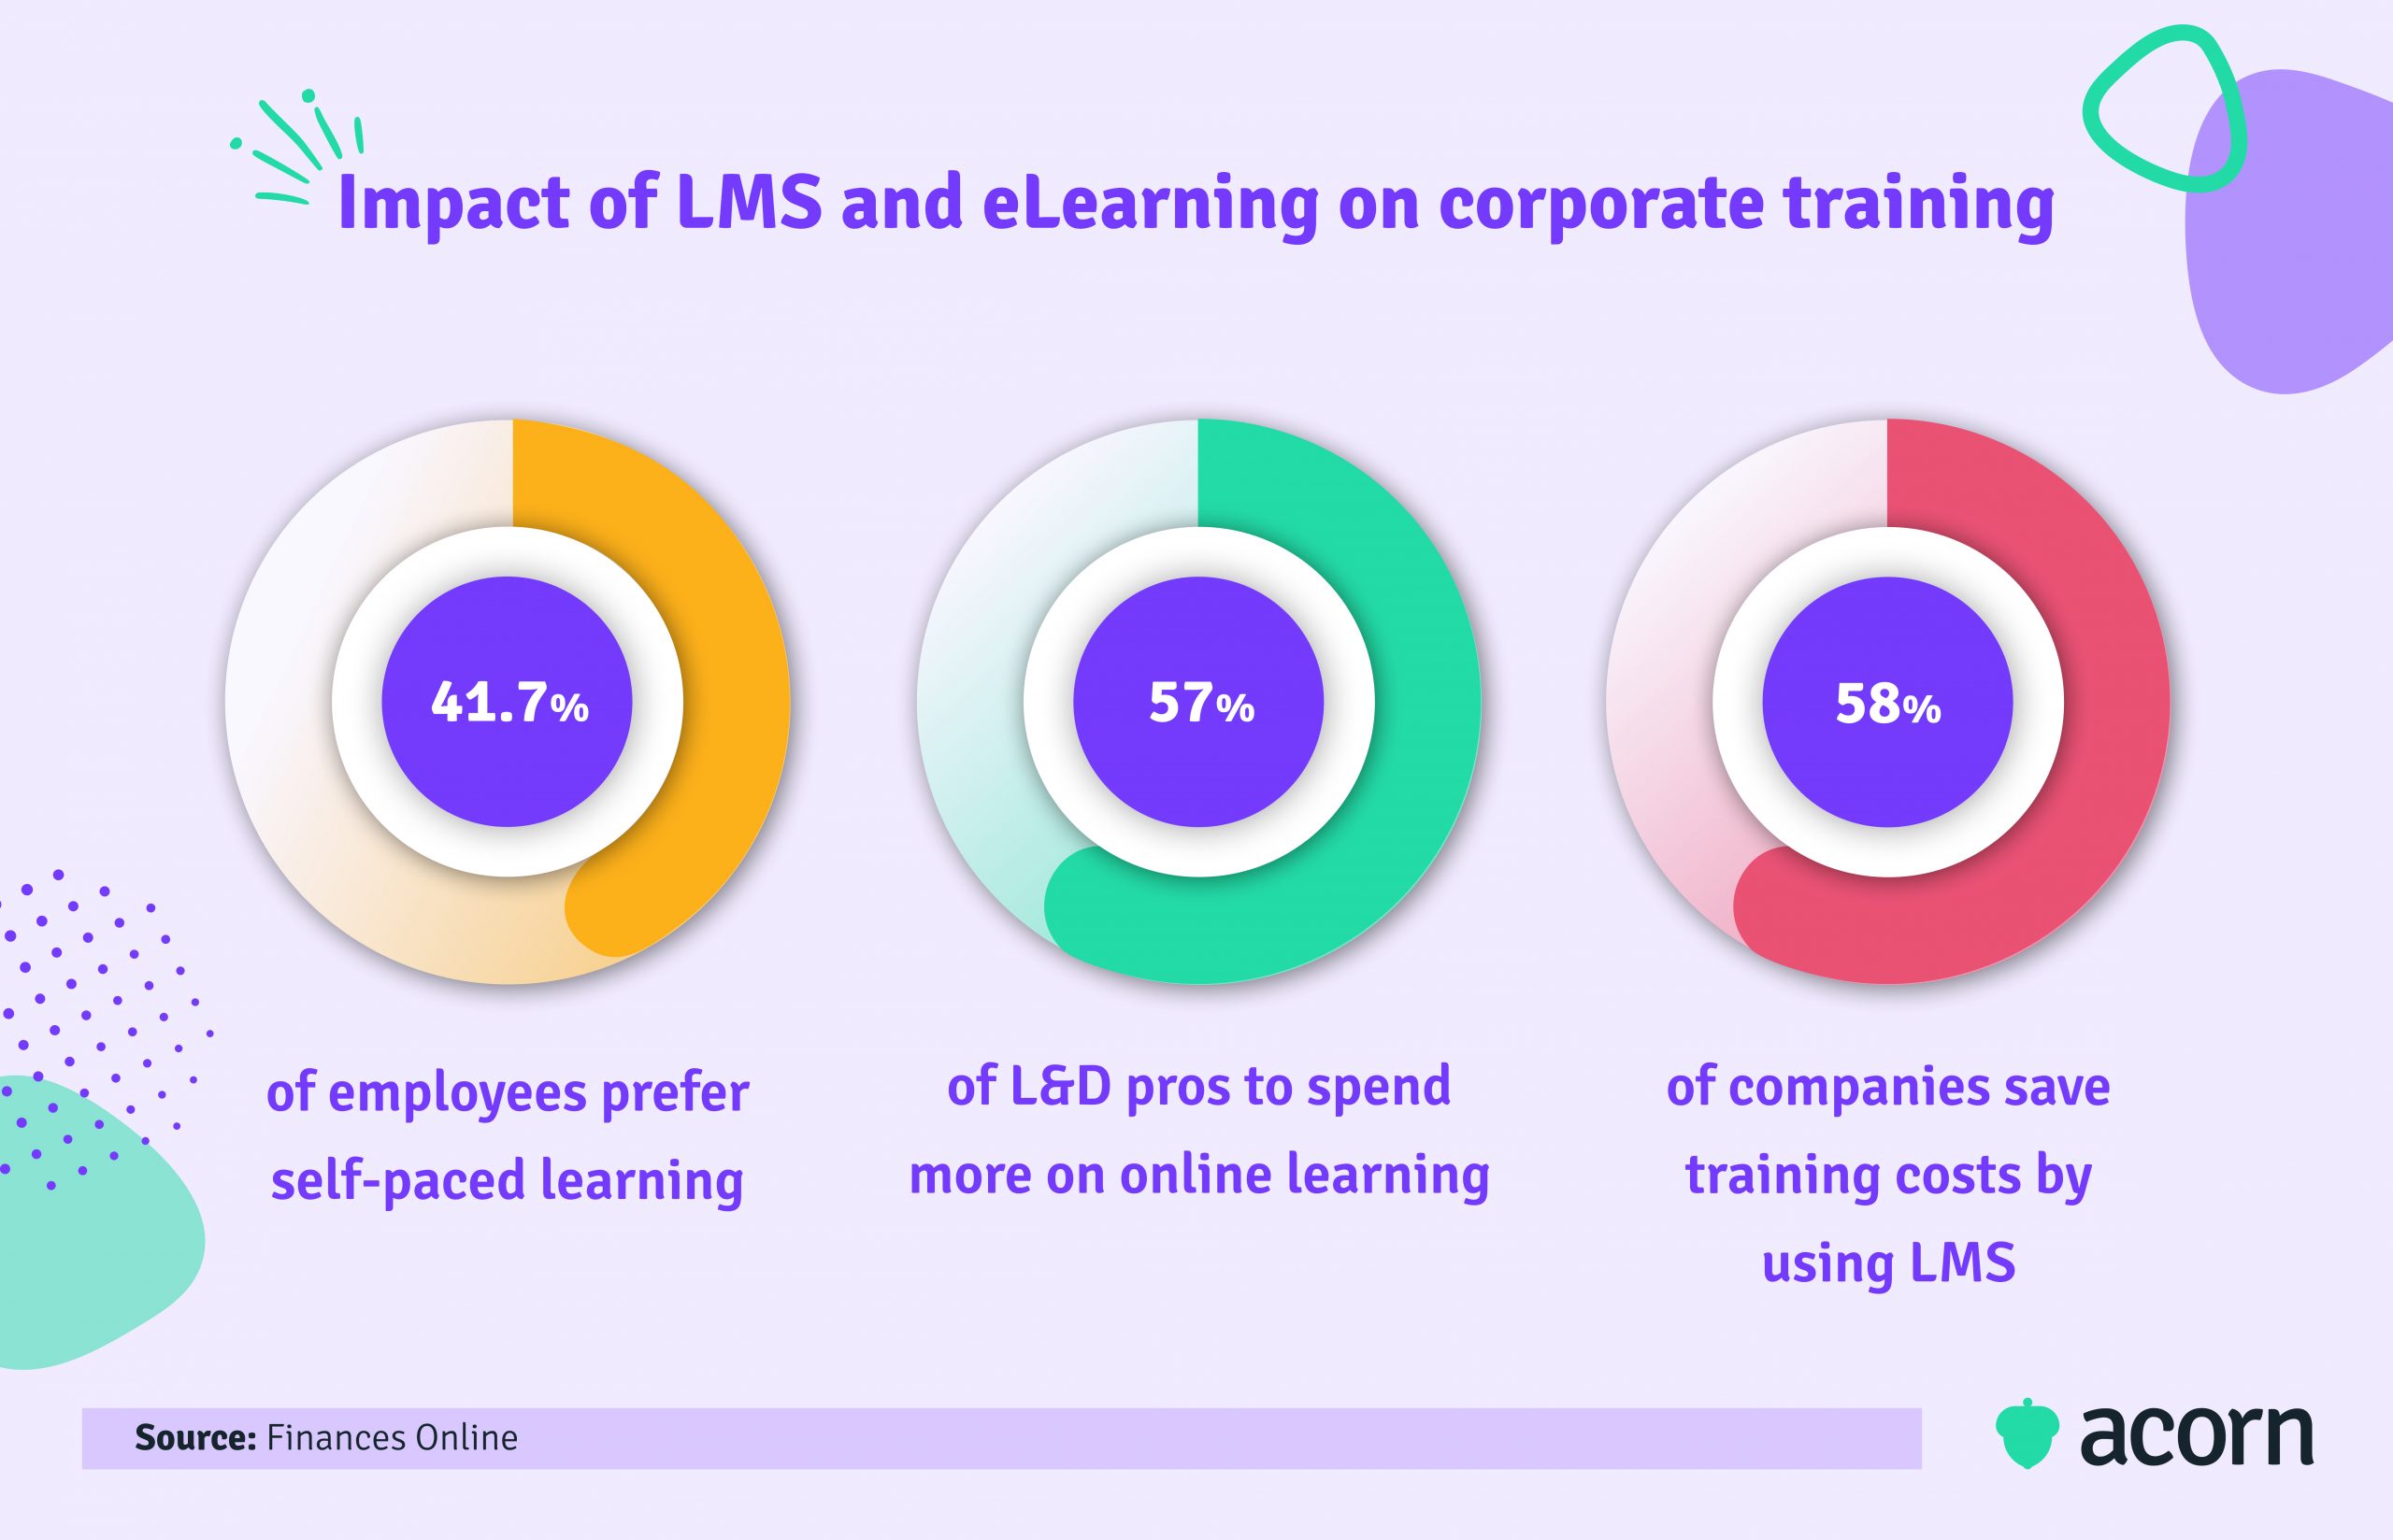 Infographic showing statistics about impact of LMSs on corporate training